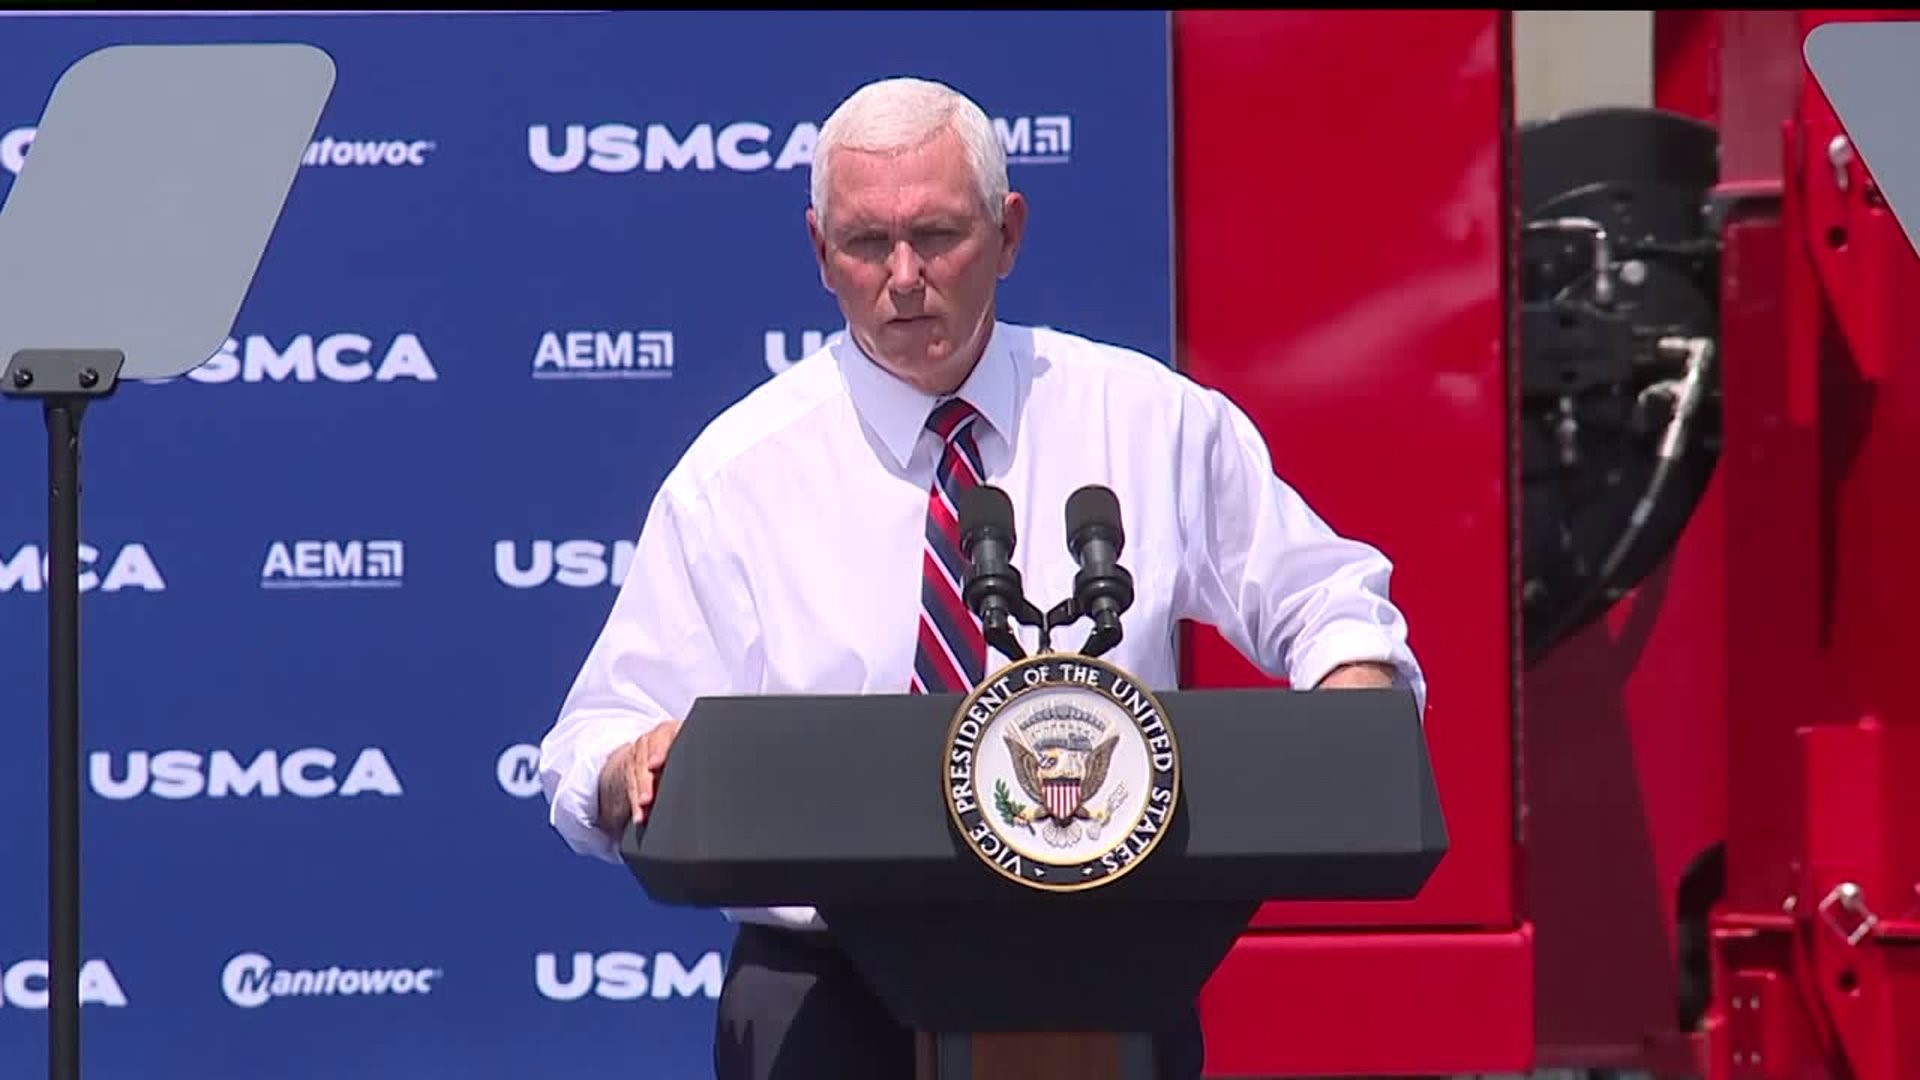 Vice President Mike Pence pushes new trade agreement support